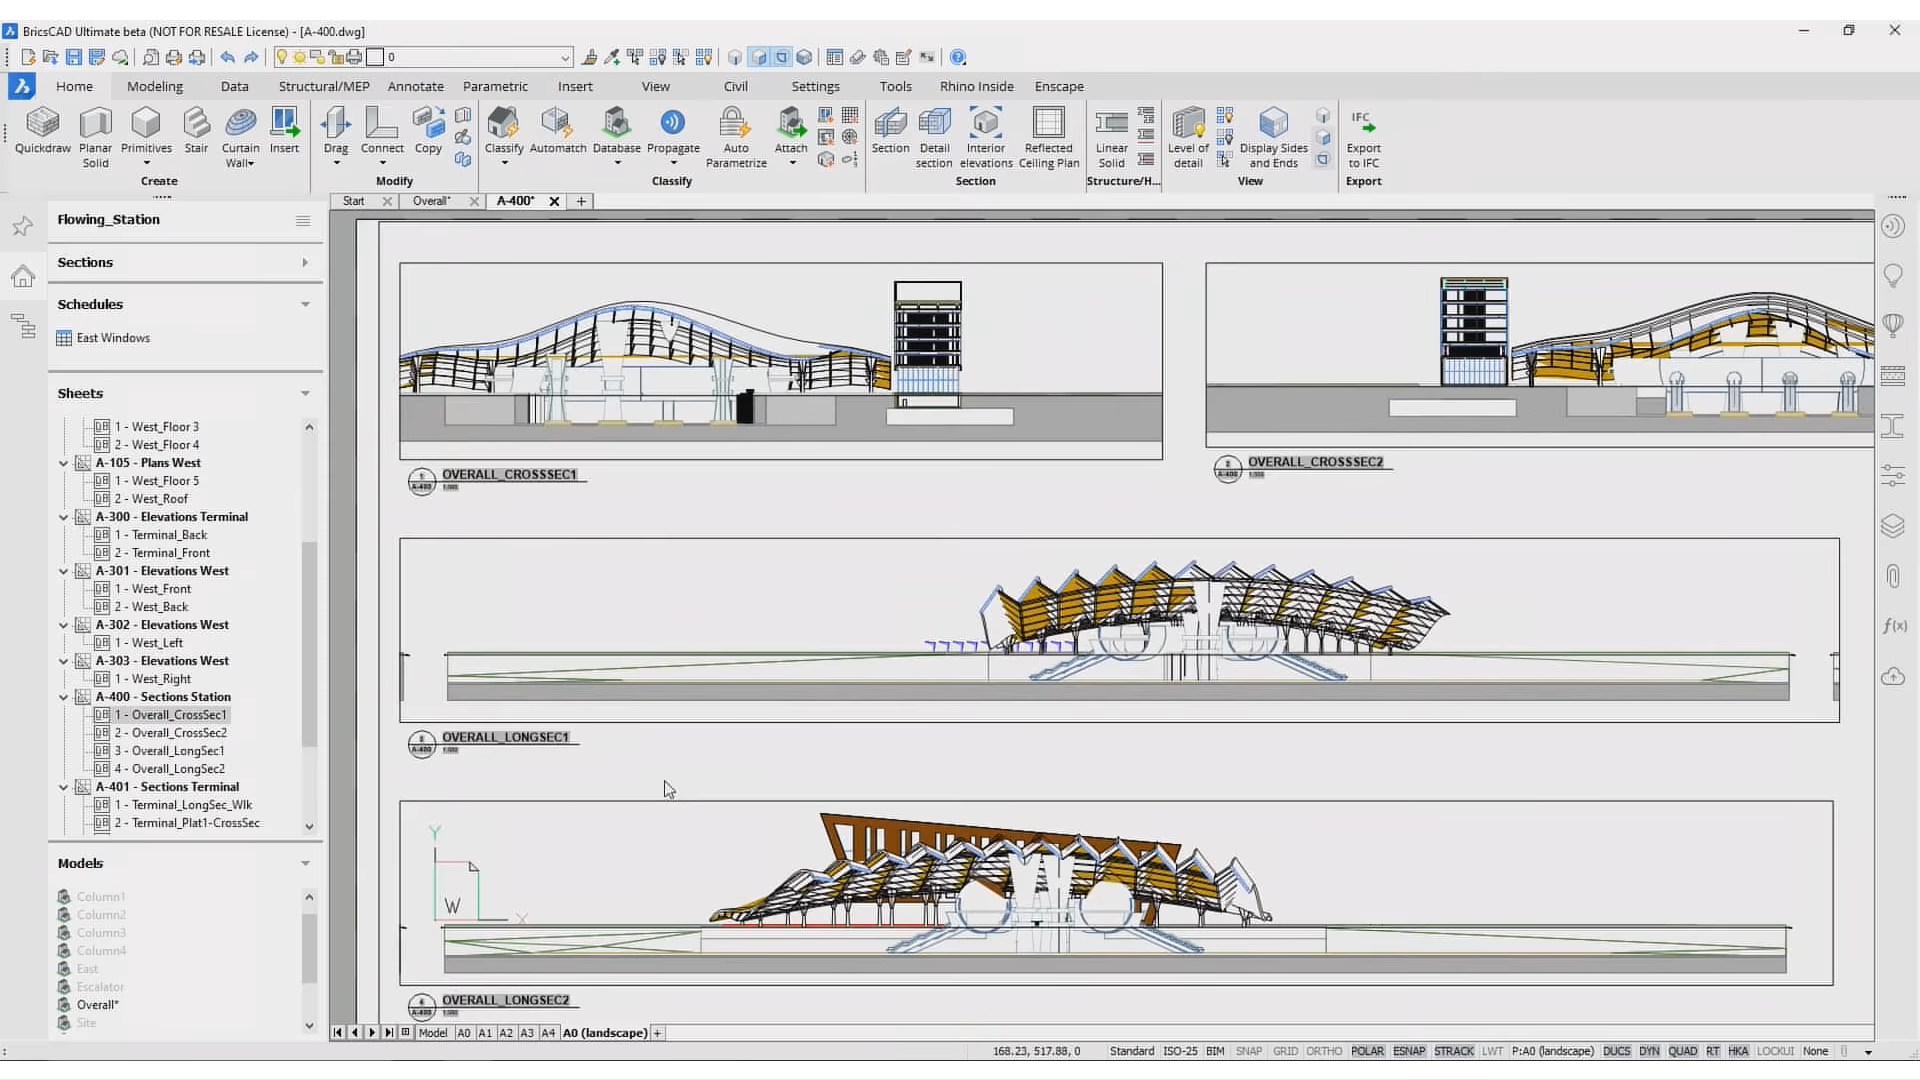 BricsCad Ultimate 23.2.06.1 for mac download